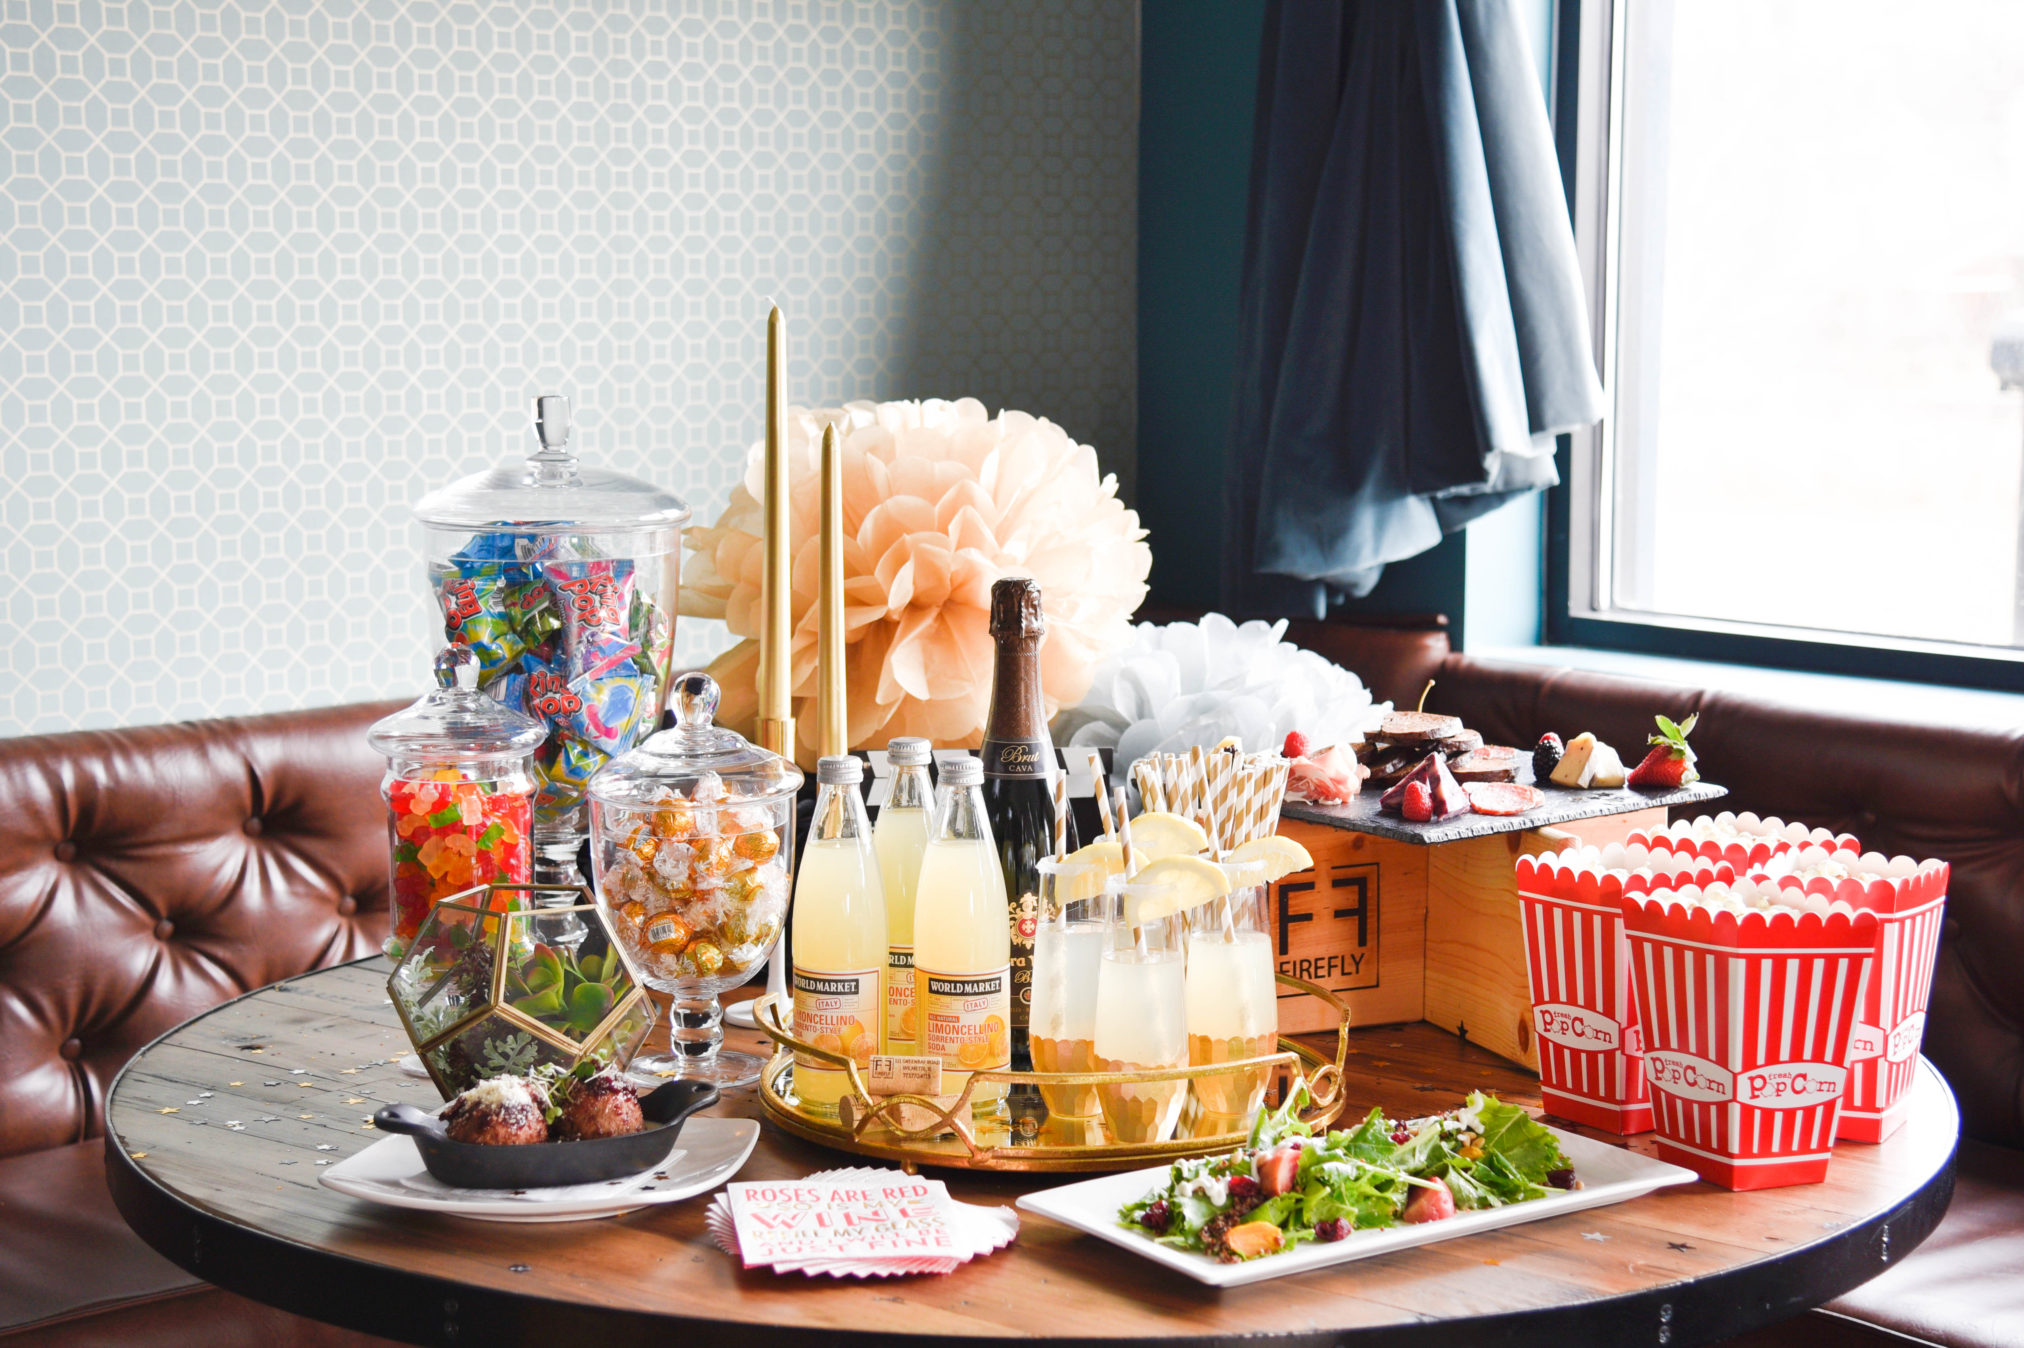 Oscar season is here and hosting a party can be easy, it's all about displaying those drinks and treats, some candy and champagne does the trick. find out more at www.homewithkeki.com